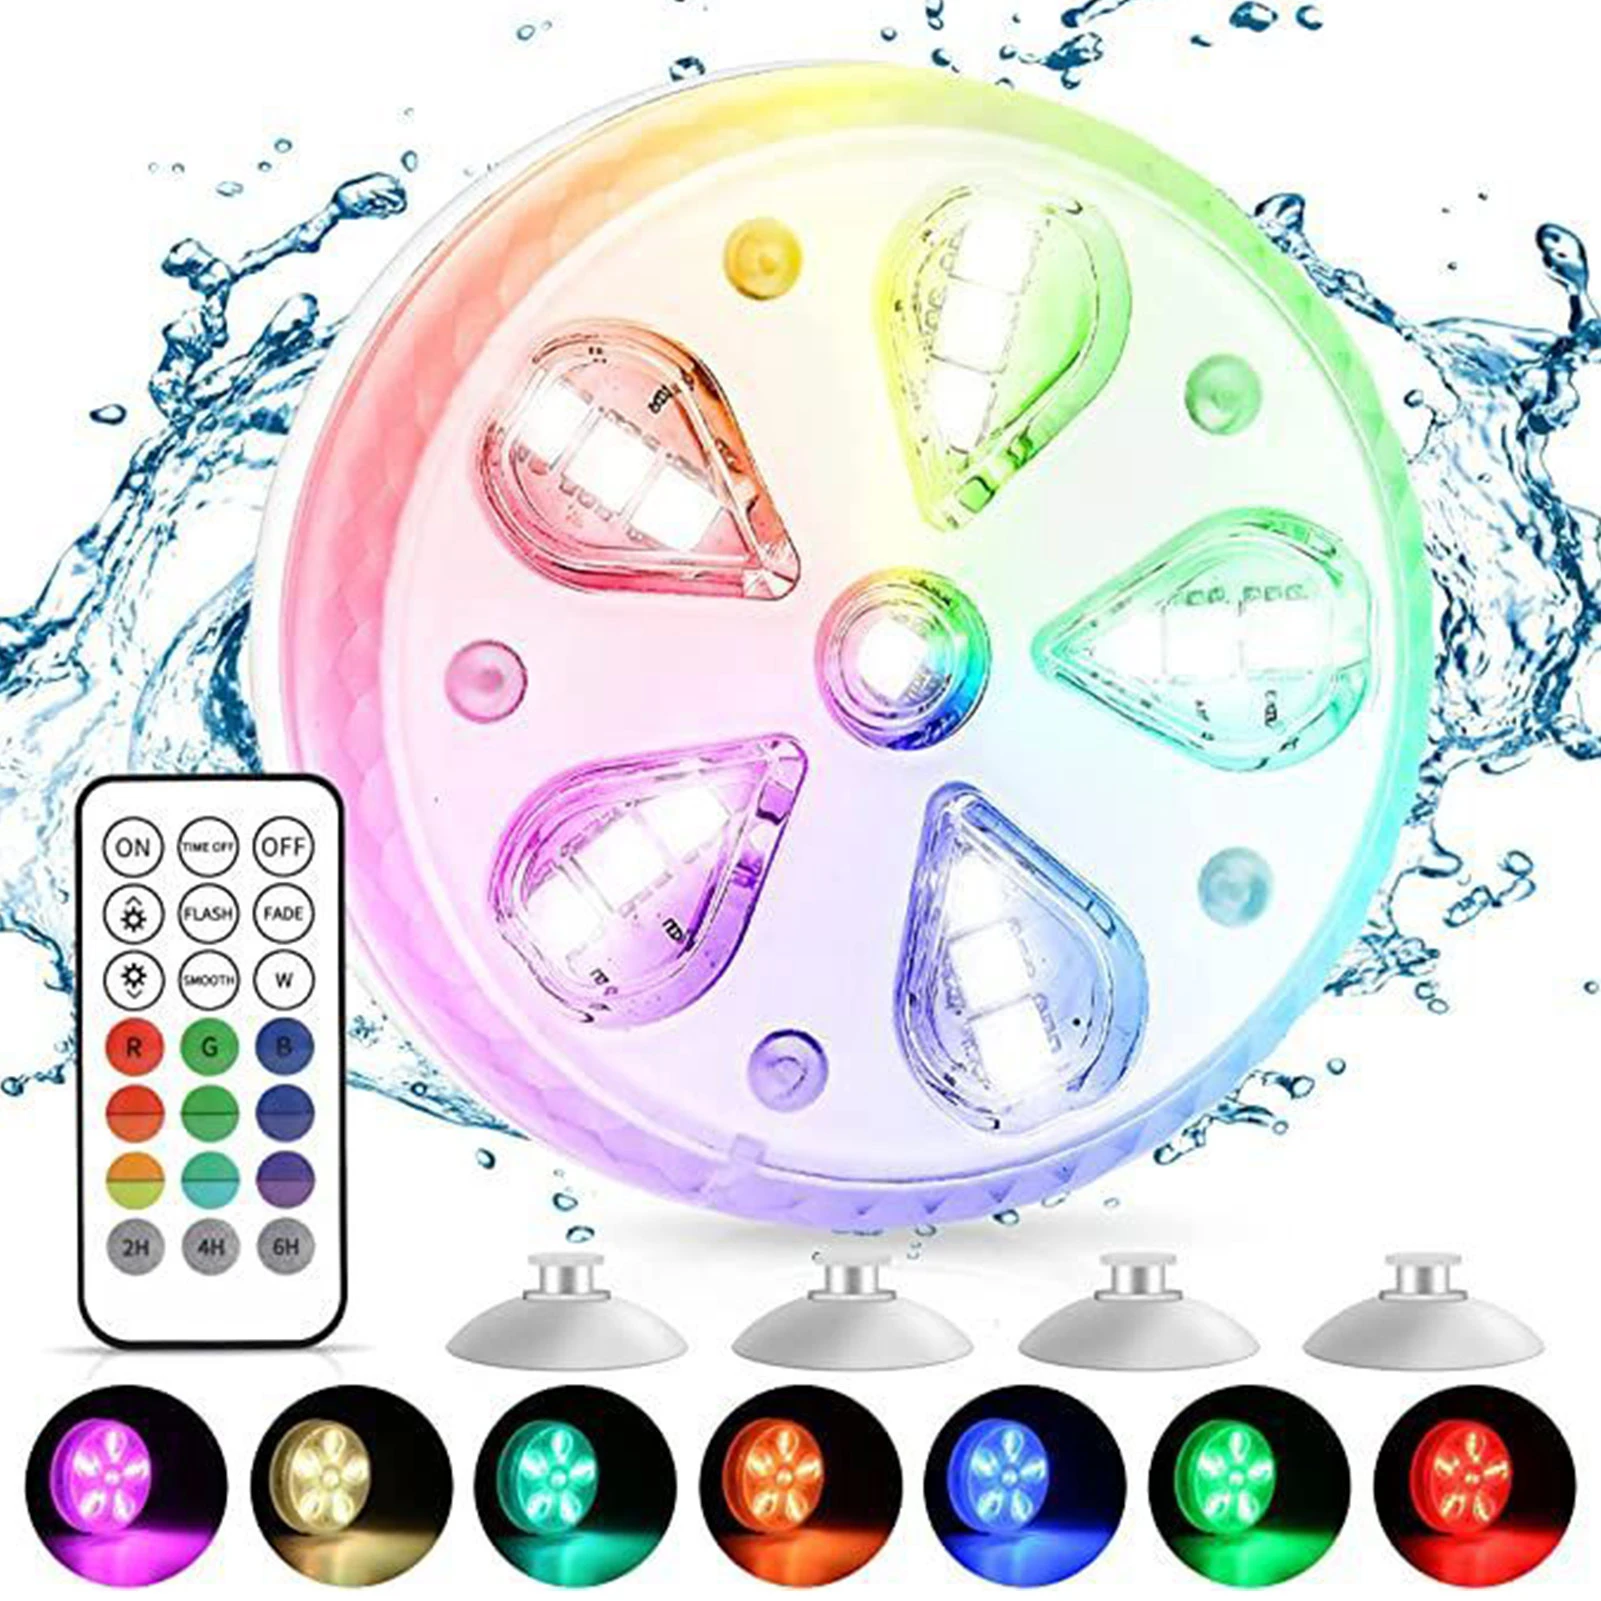 Submersible LED Pool Light With Remote Control IP68 Waterproof Multi Color Changing Night Lamp Outdoor Garden Party Decoration underwater lights for fountains